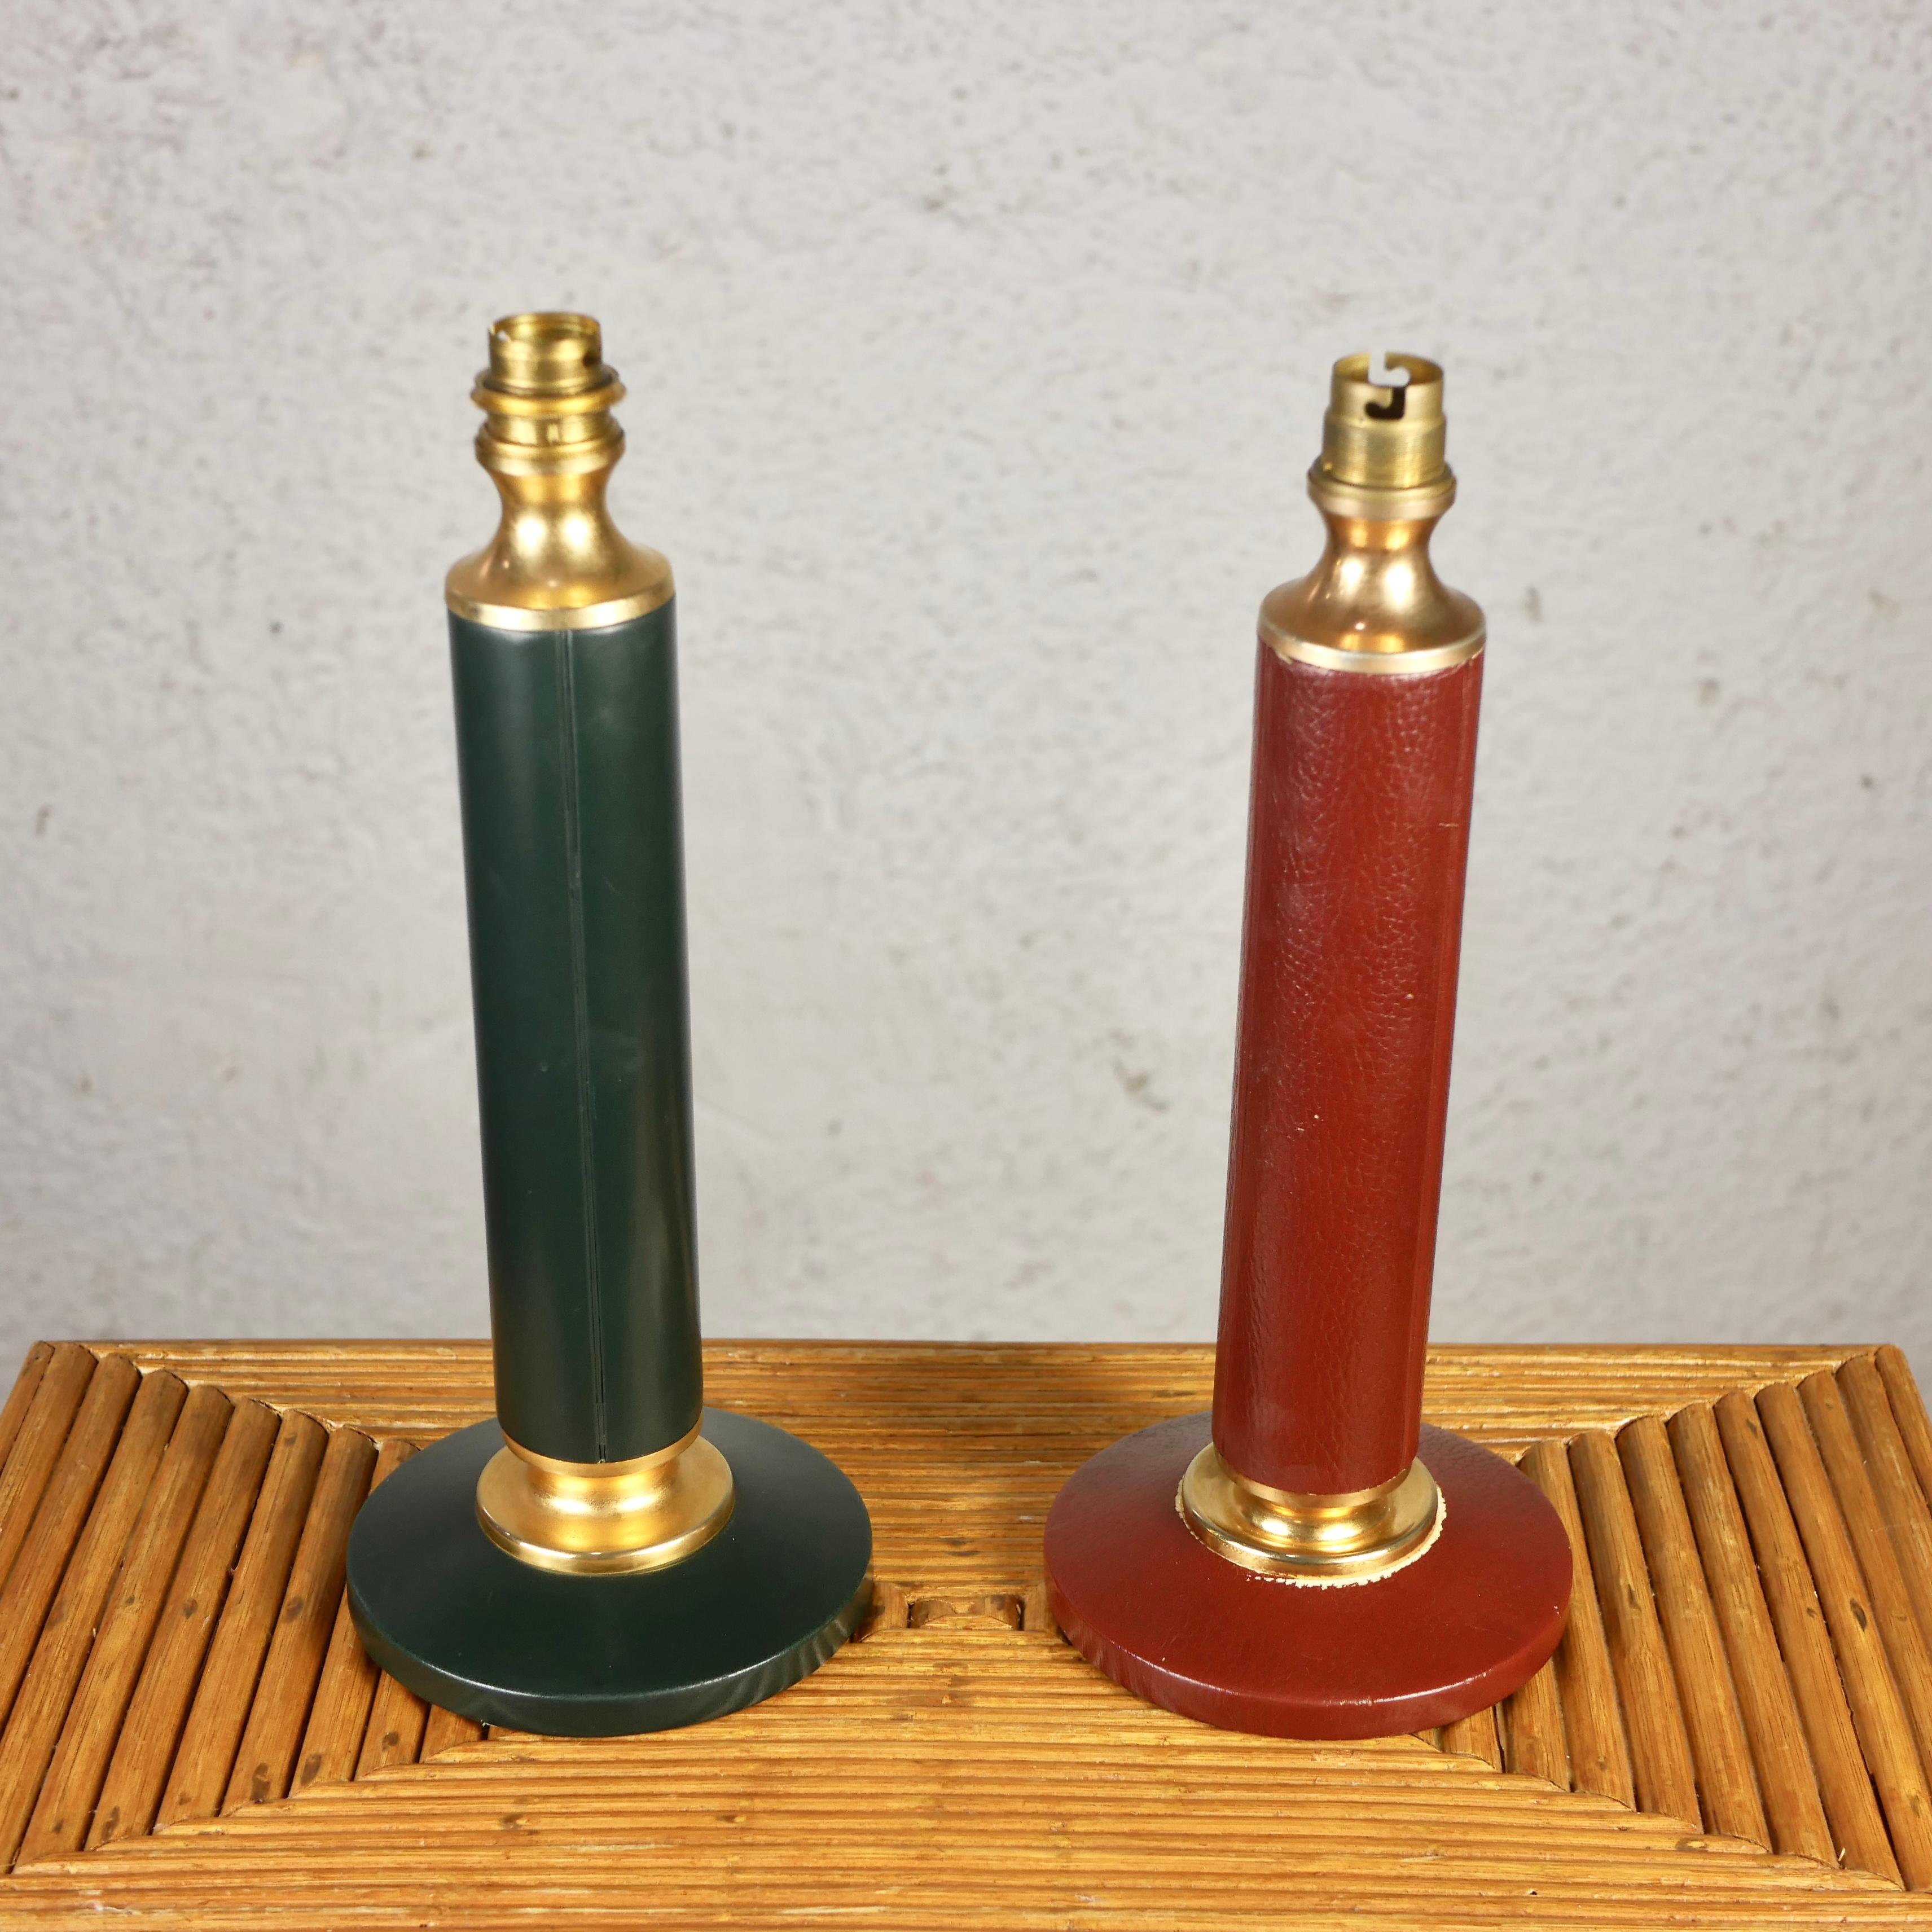 Beautiful set of 2 lamp bases in the style of Jacques Adnet, in leather and brass.
One lamp has a beautiful green leather and the other one had a red - brick grained leather.
Still with their original brown bakelite switches and functional.
Would